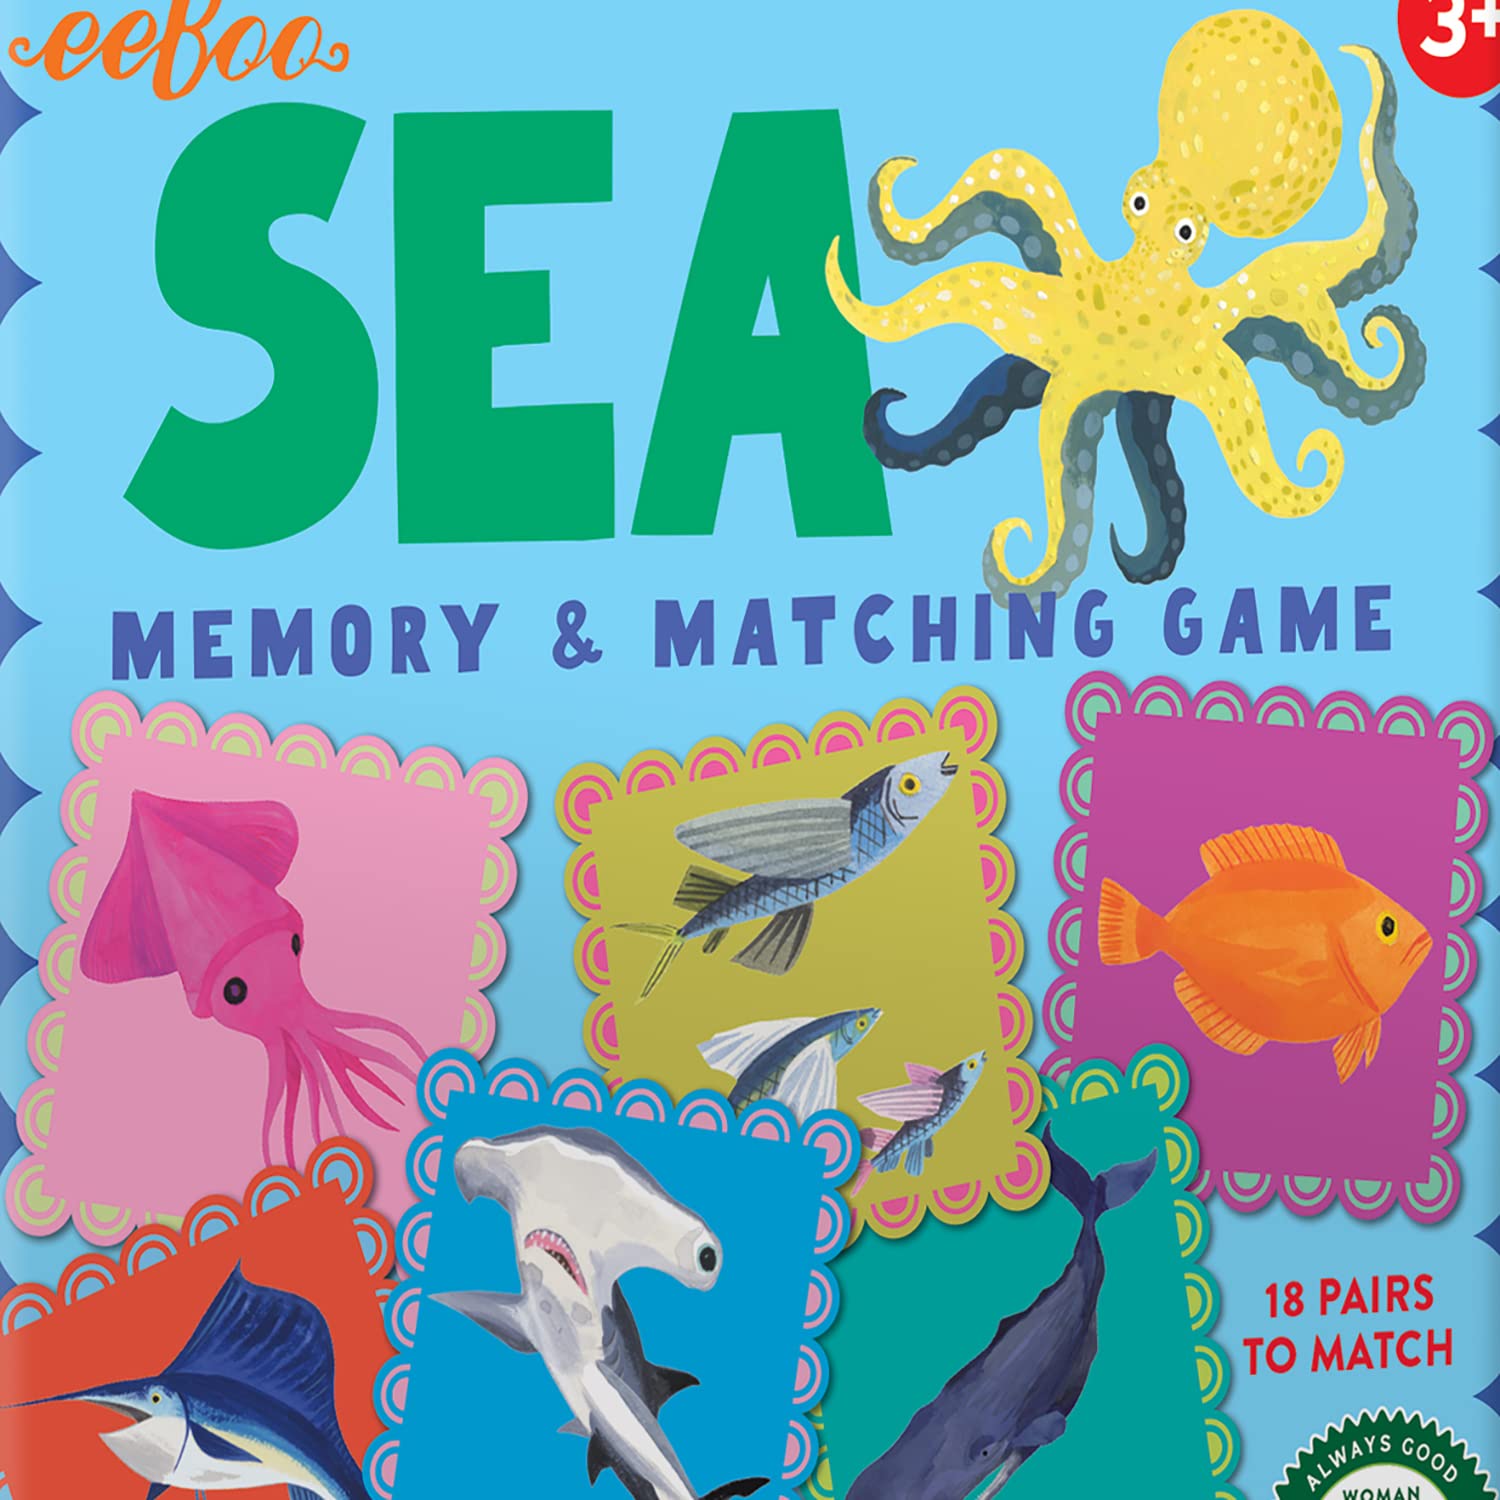 eeBoo: Sea Little Square Memory & Matching Game, Developmental and Educational Fun, Builds Recognition and Memory Skills, For Ages 3 and up